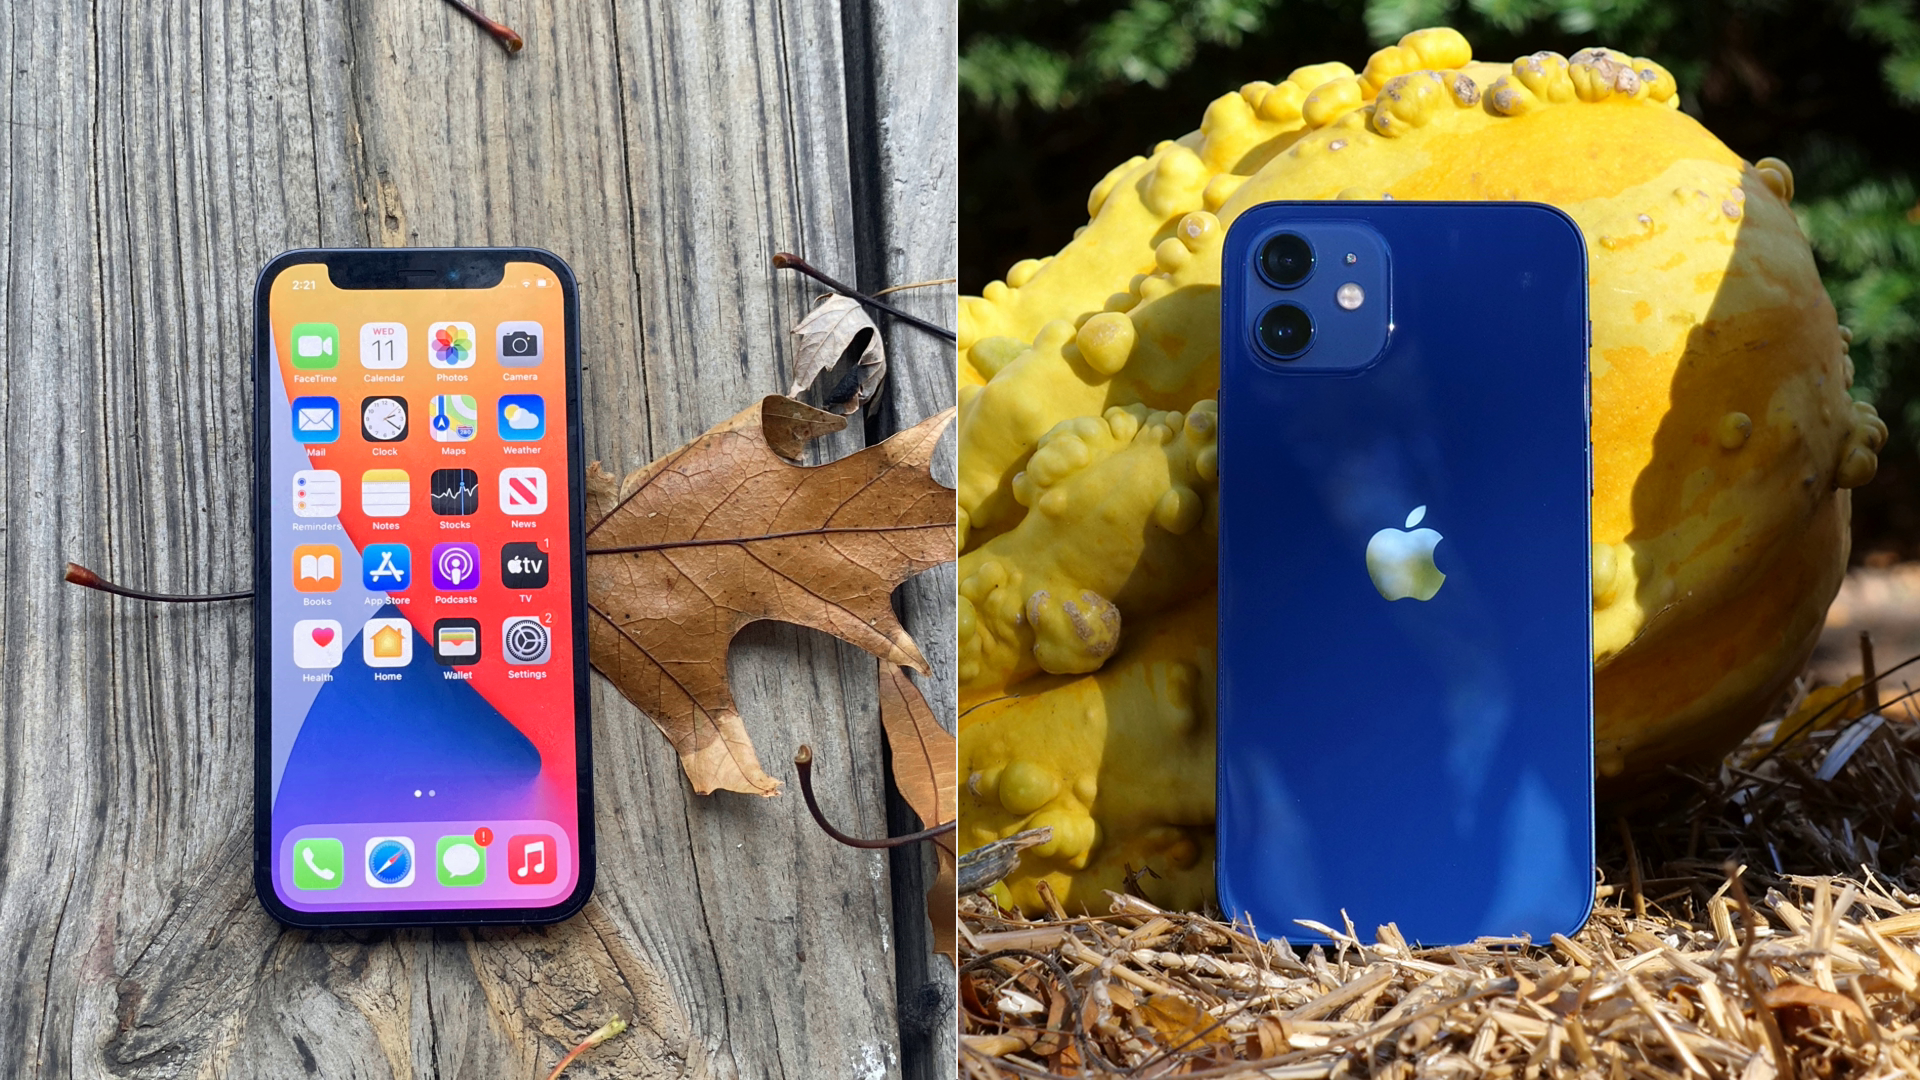 iPhone 12 mini vs. iPhone 12: The winner will surprise you | Laptop Mag